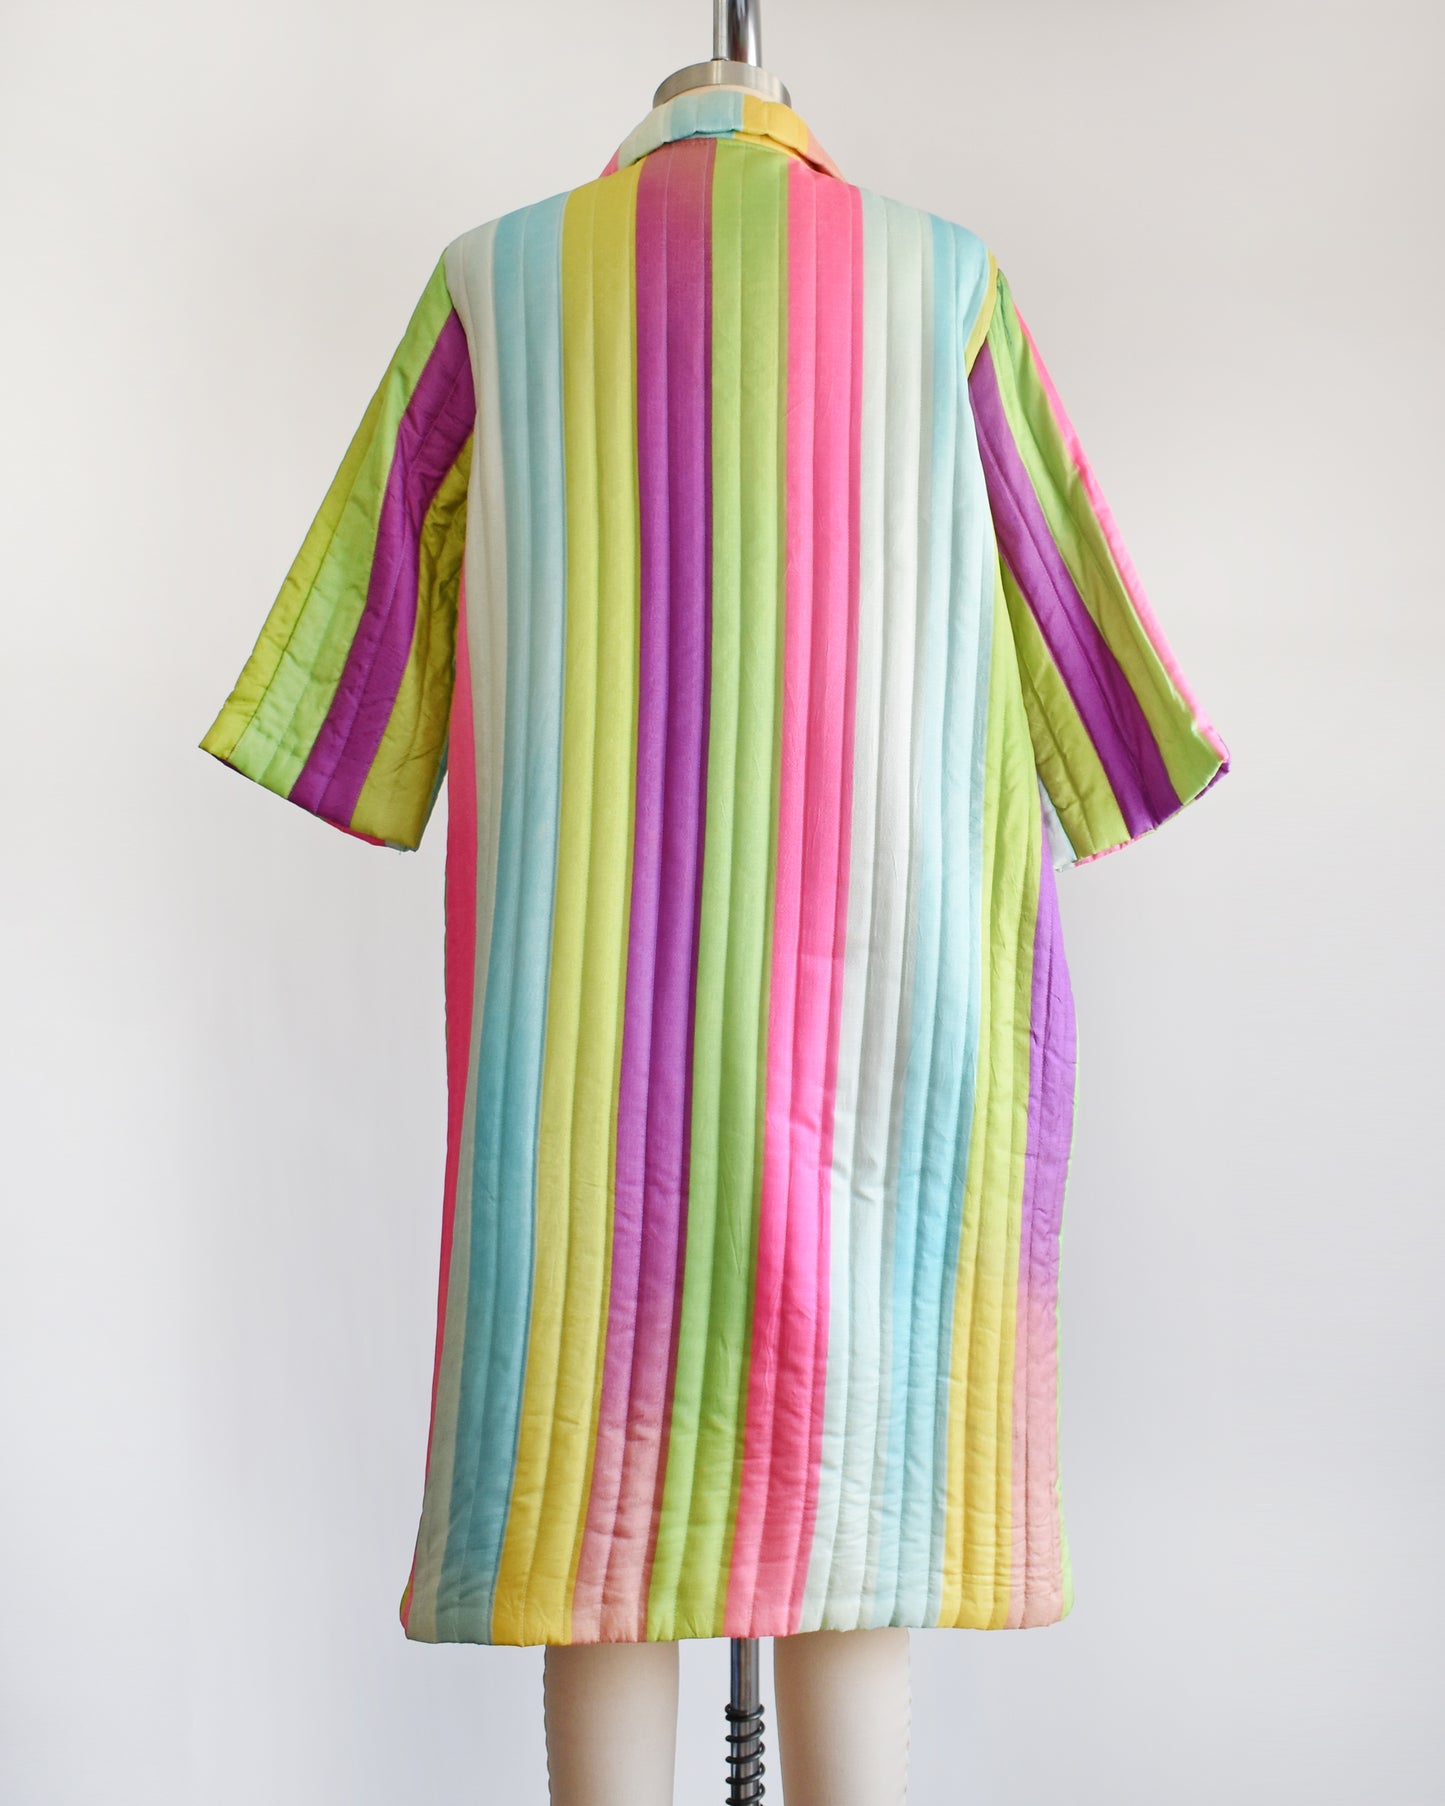 Back view of a vintage 1960s rainbow striped quilted robe with  purple, pink, blue, and green stripes